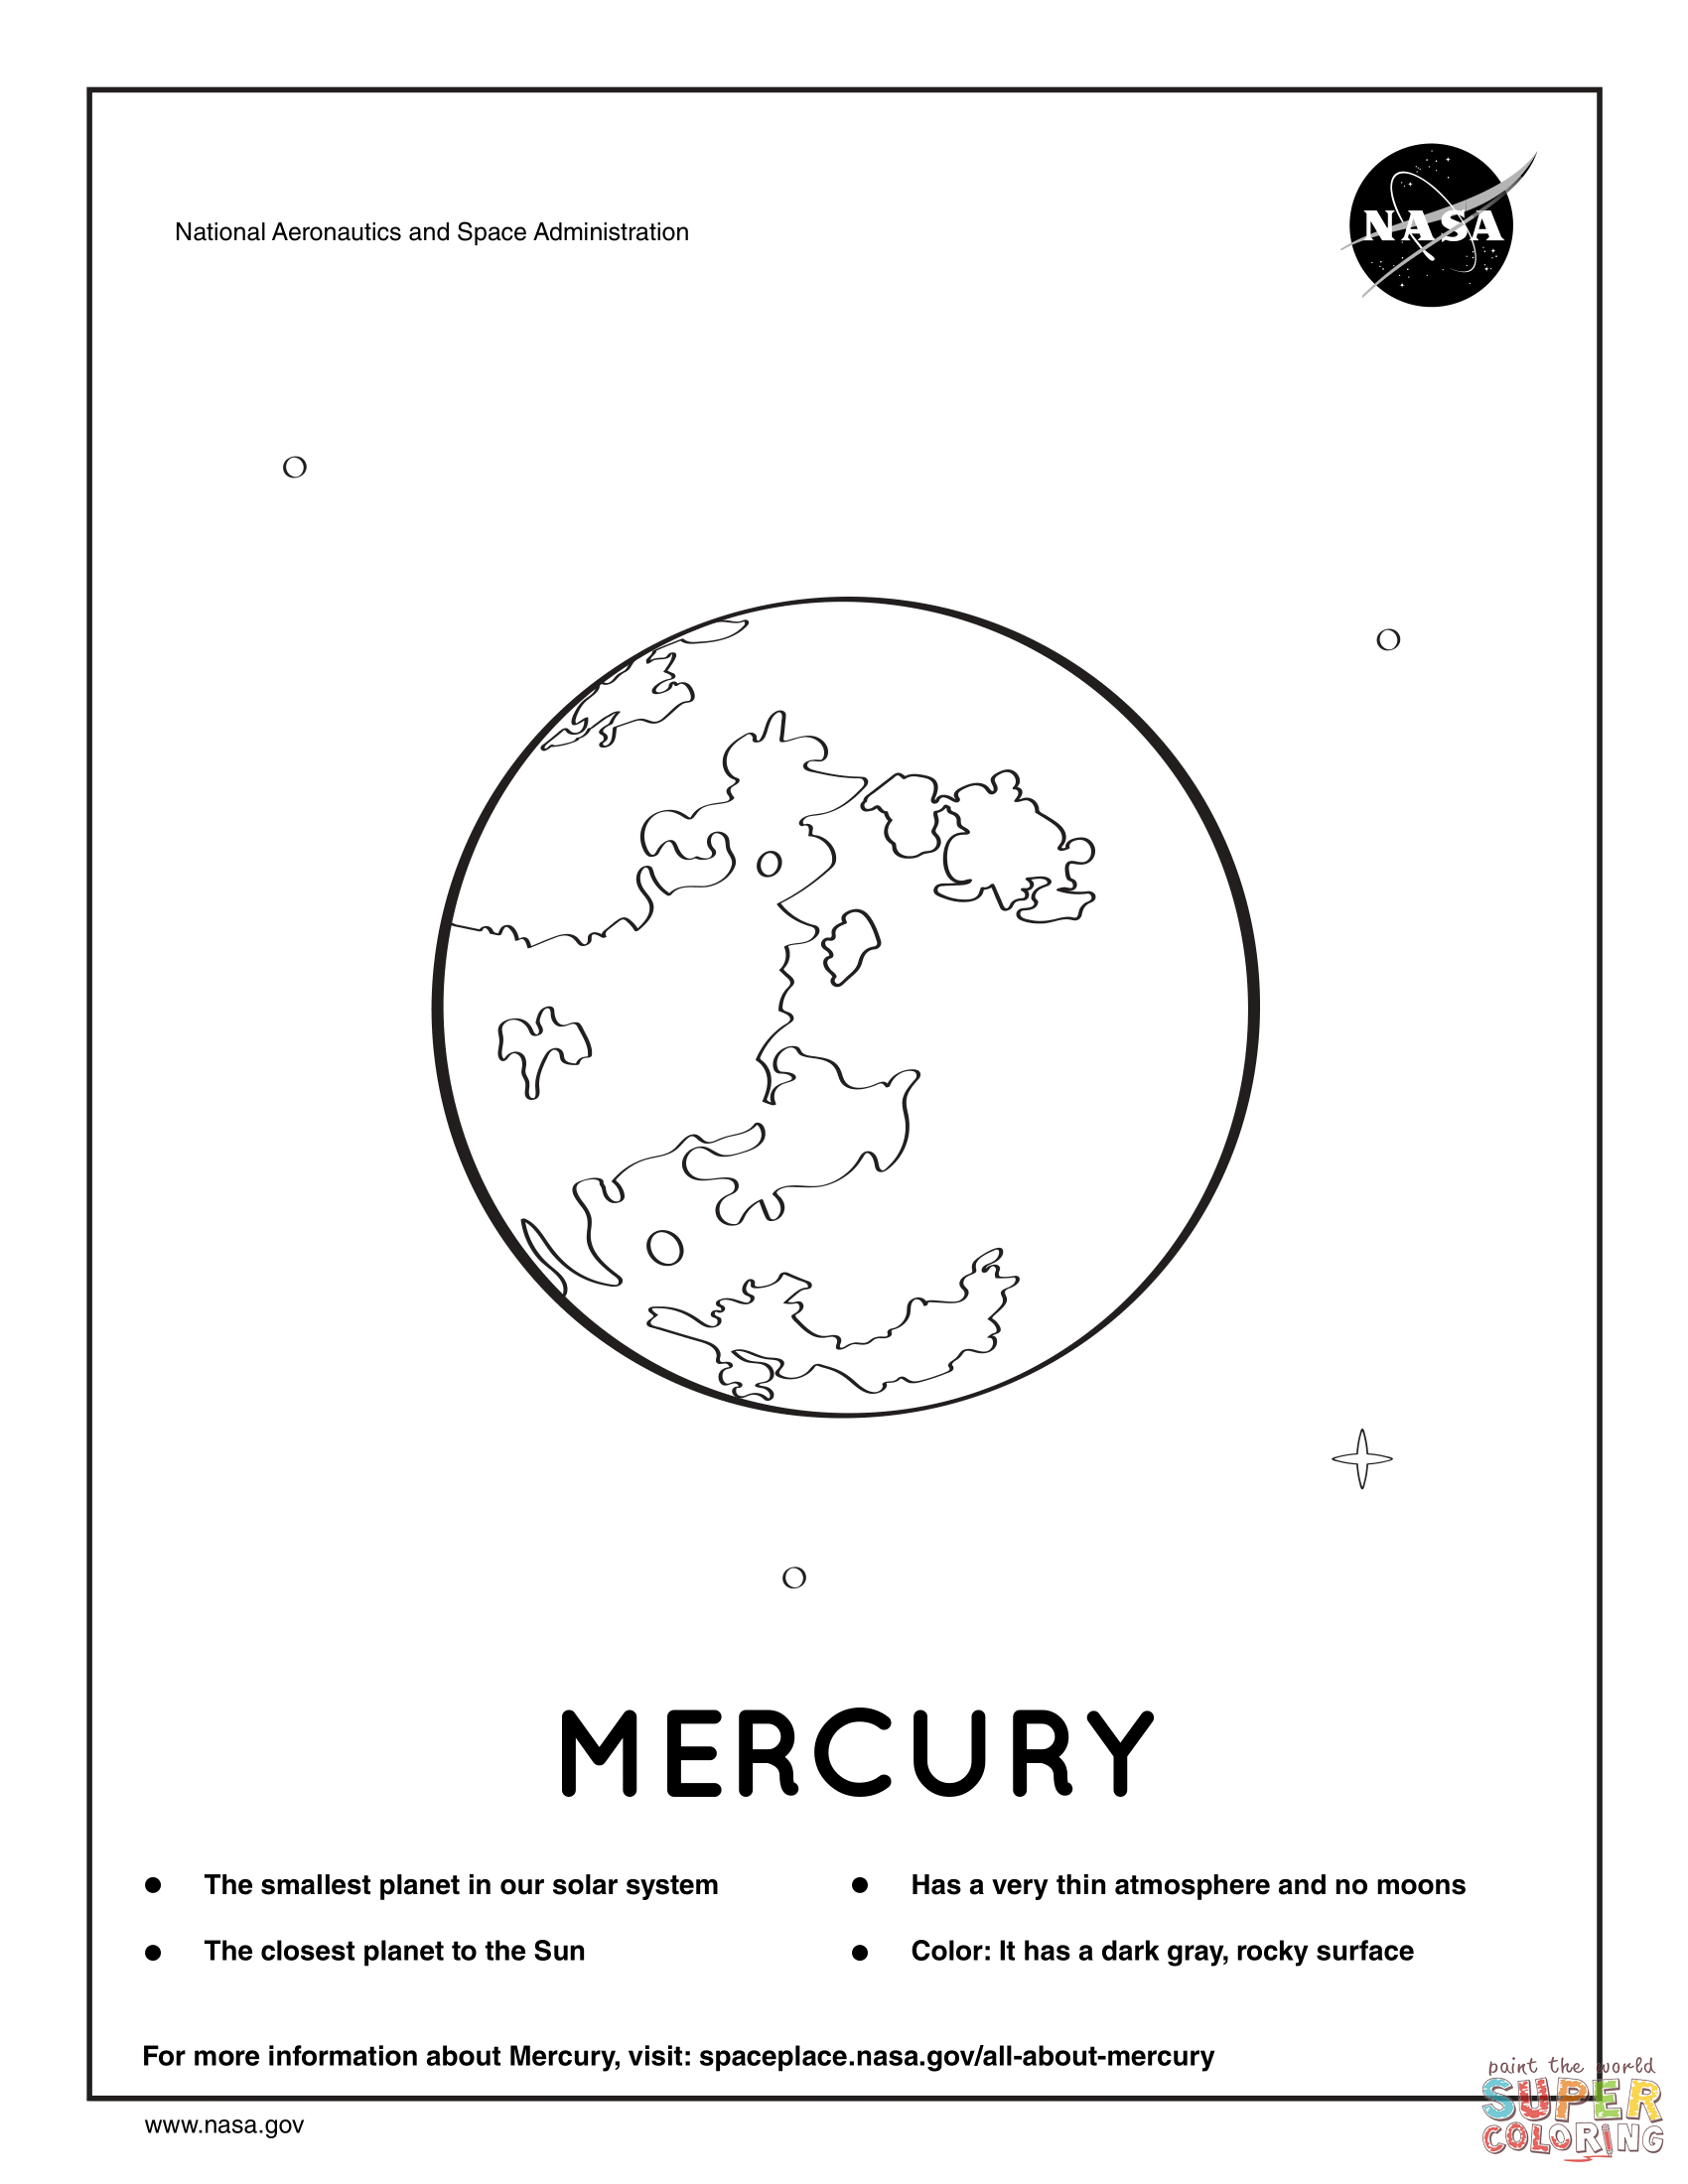 Solar system planet mercury coloring page free printable coloring pages